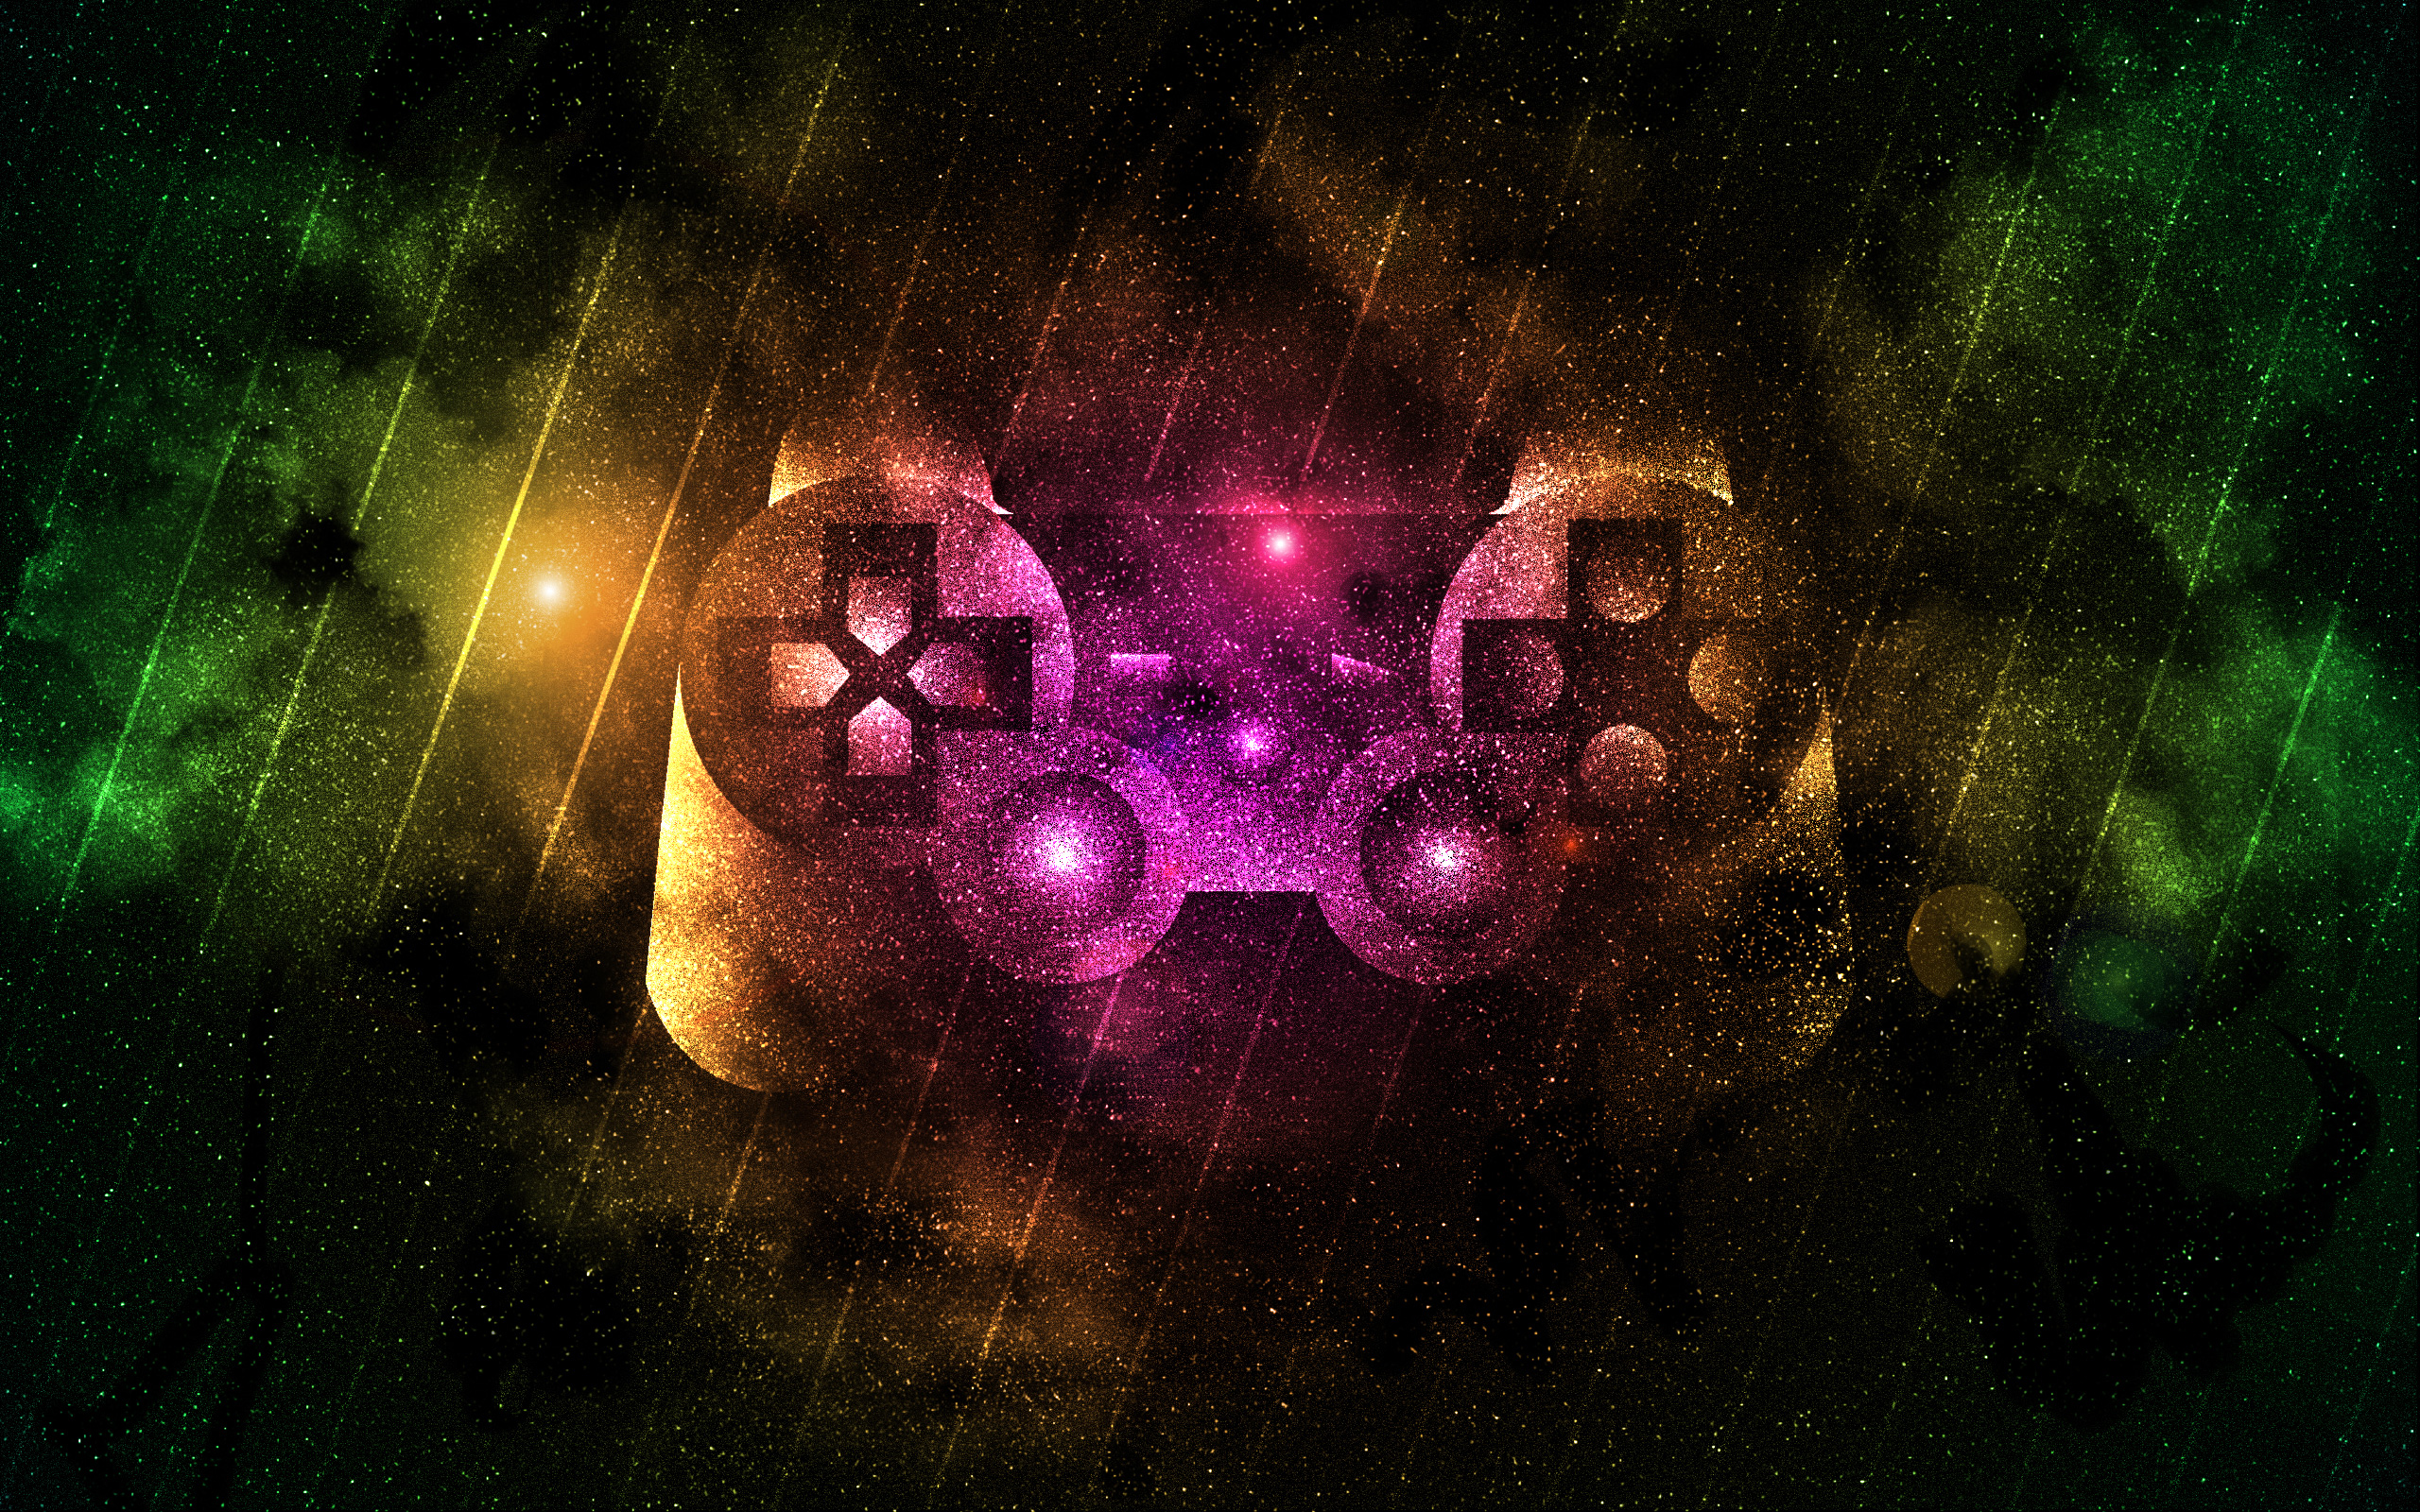 Video Game Controller HD Wallpaper | Background Image